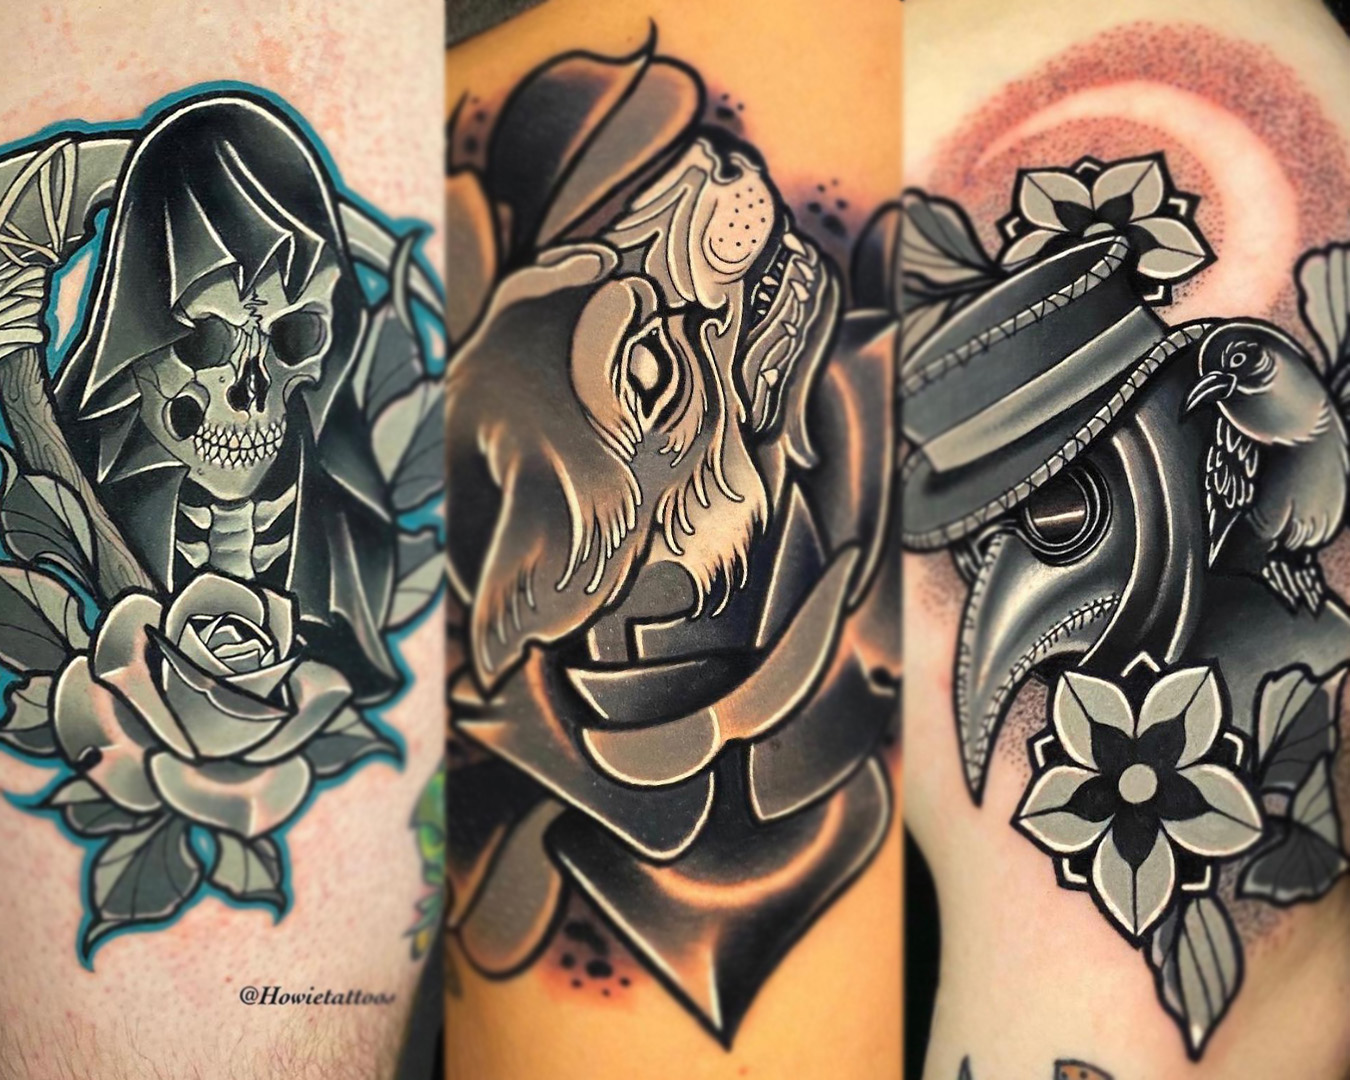 Black and Gray tattoos of a reaper with flowers, a wolf in a rose, and a plague doctor